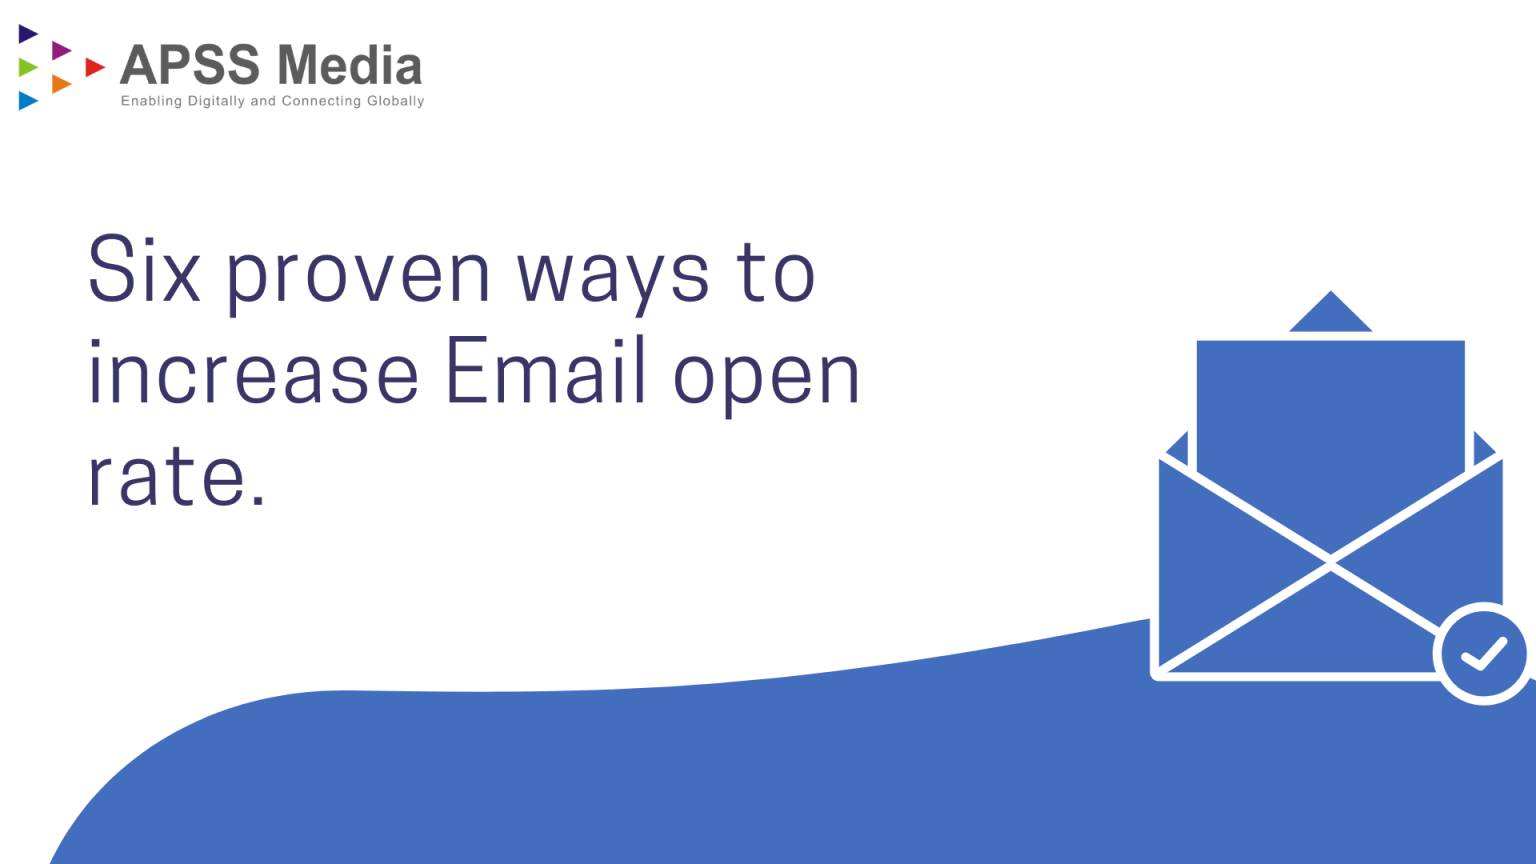 Six proven ways to increase Email open rate.